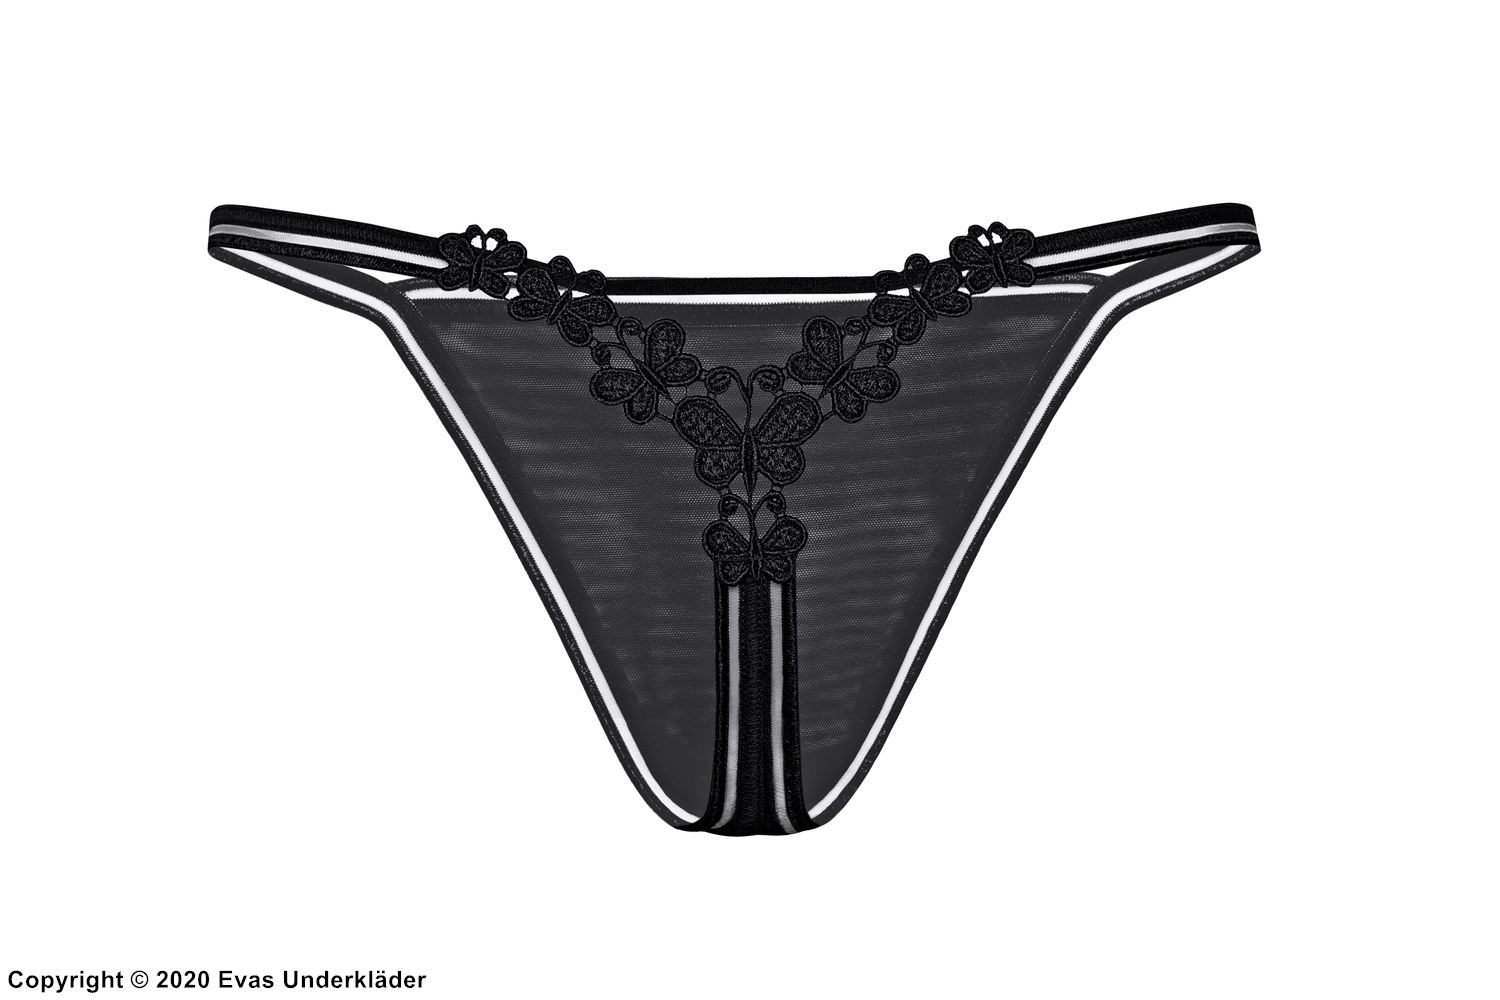 Romantic G-string, lace application, double straps, butterfly